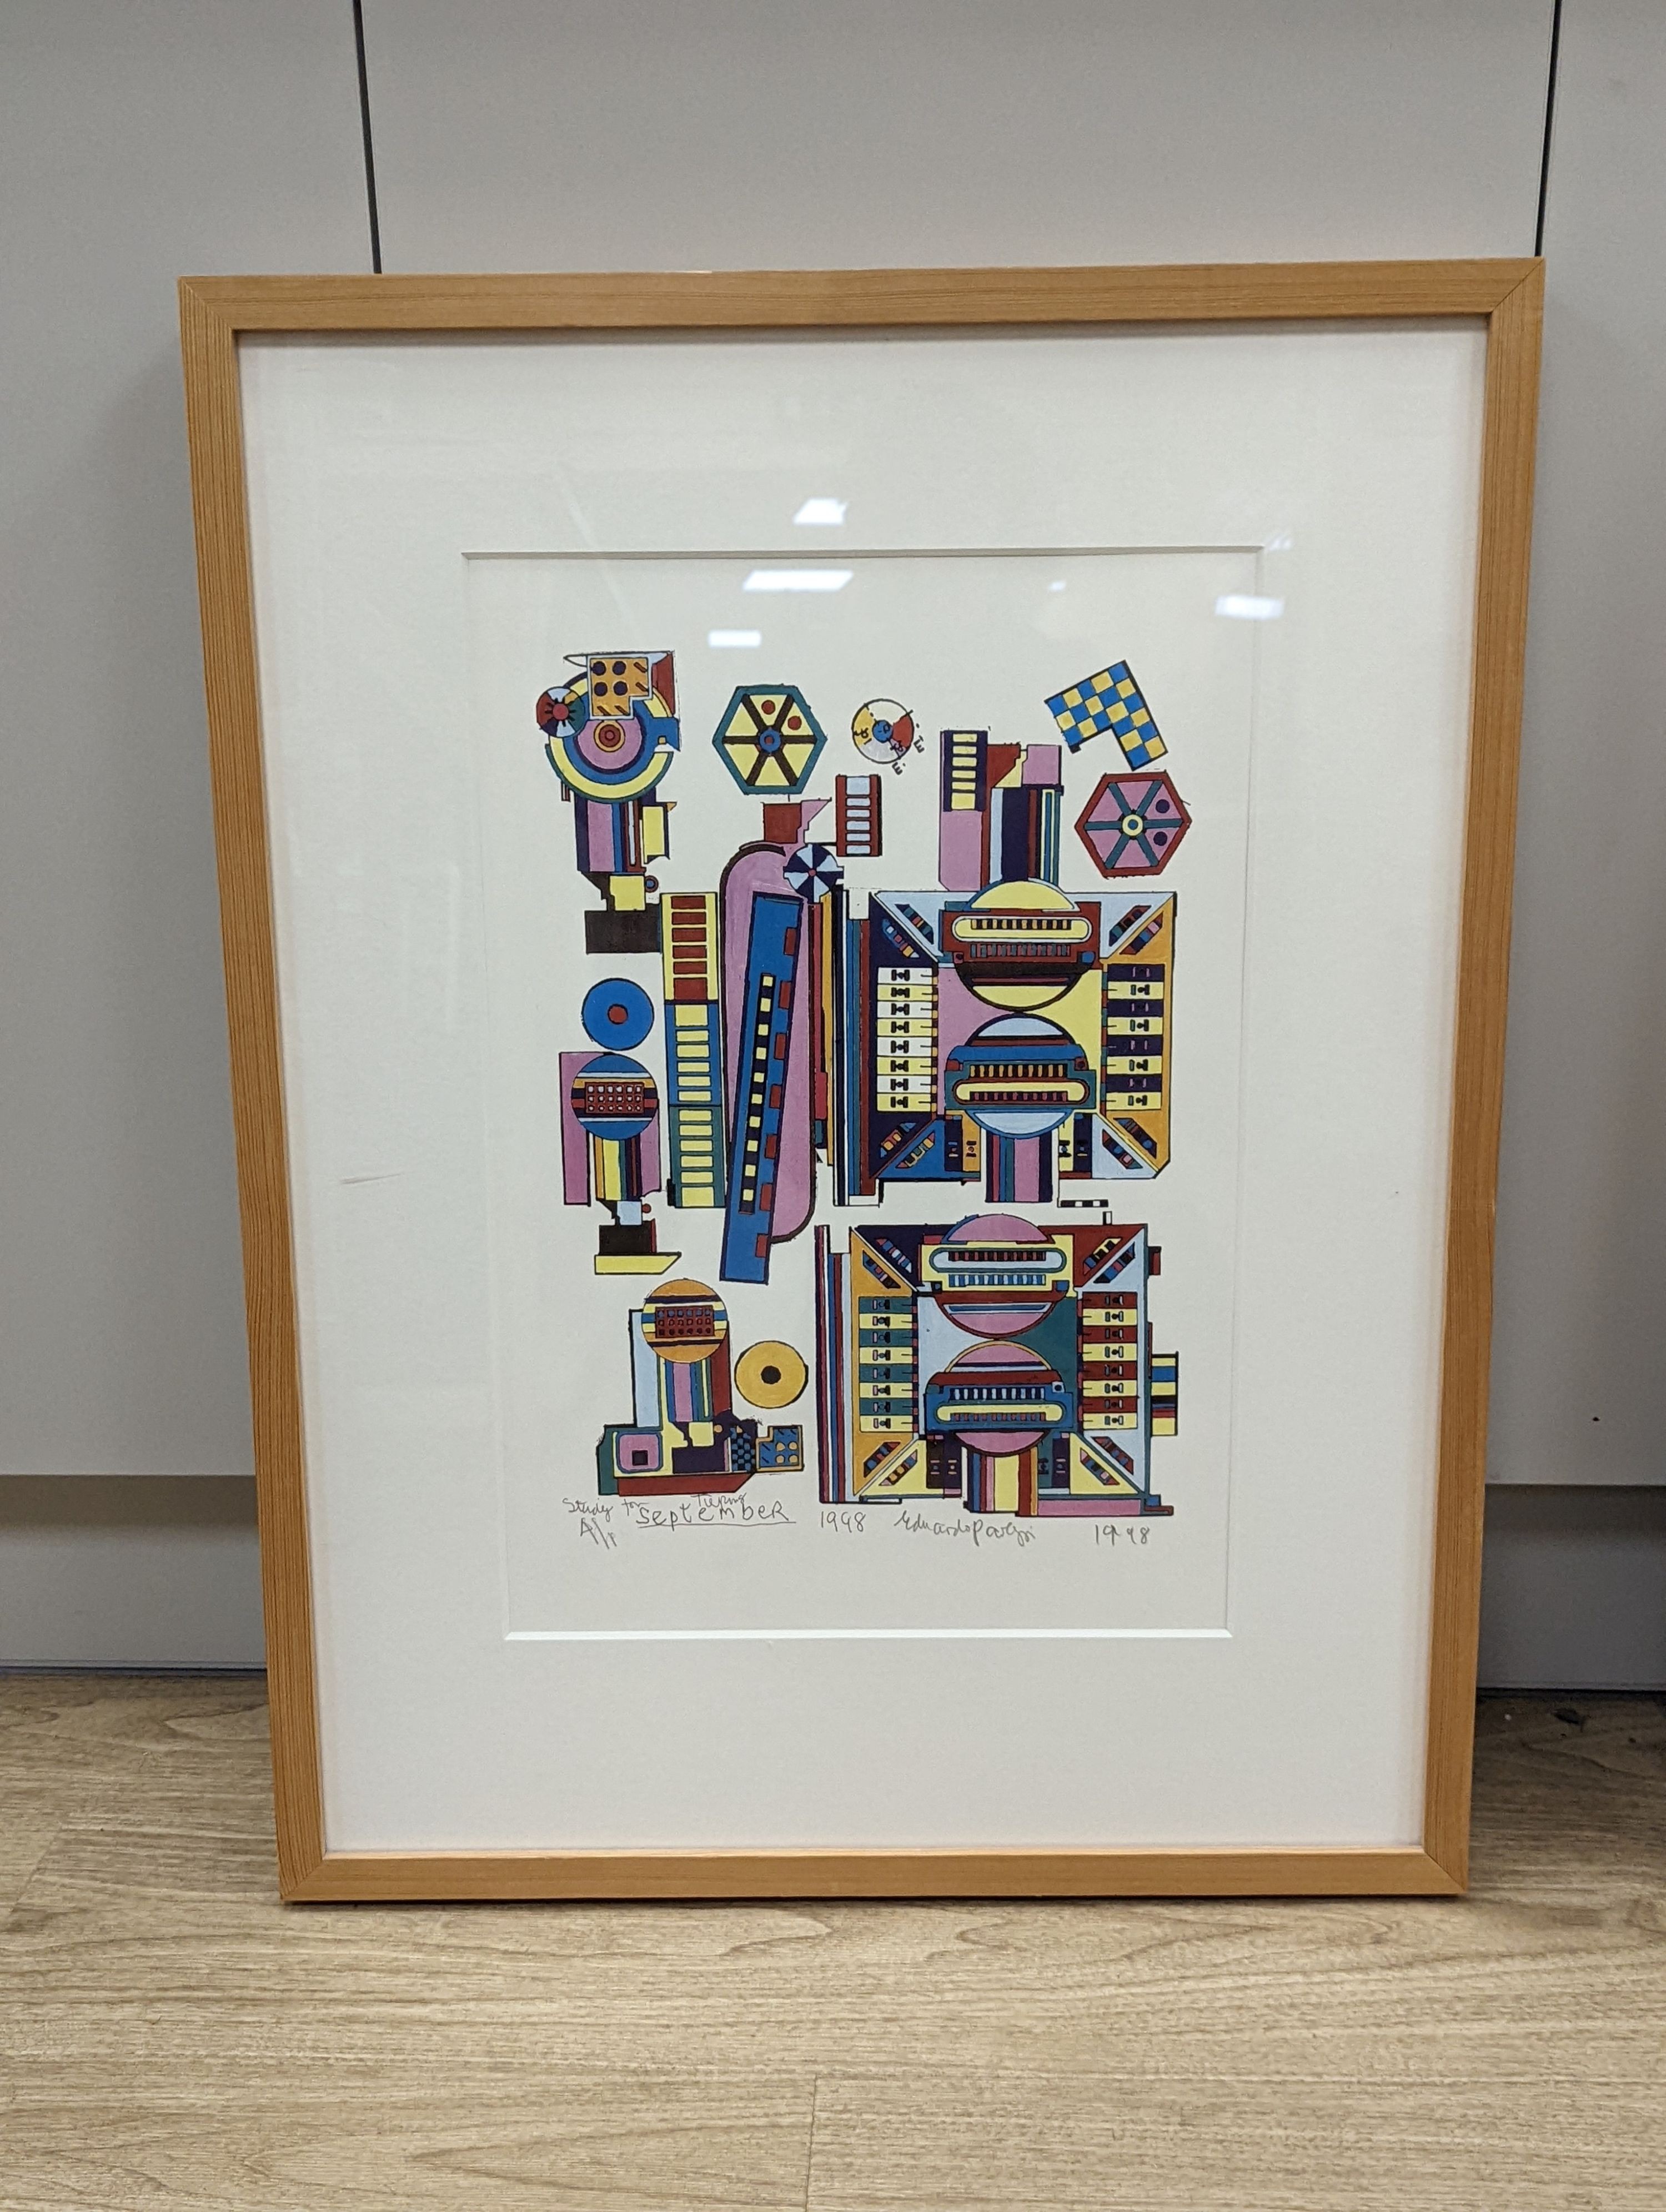 Eduardo Paolozzi (1924-2005), screenprint, Study for Turing, signed artist's proof dated 1998, 49 x 34cm